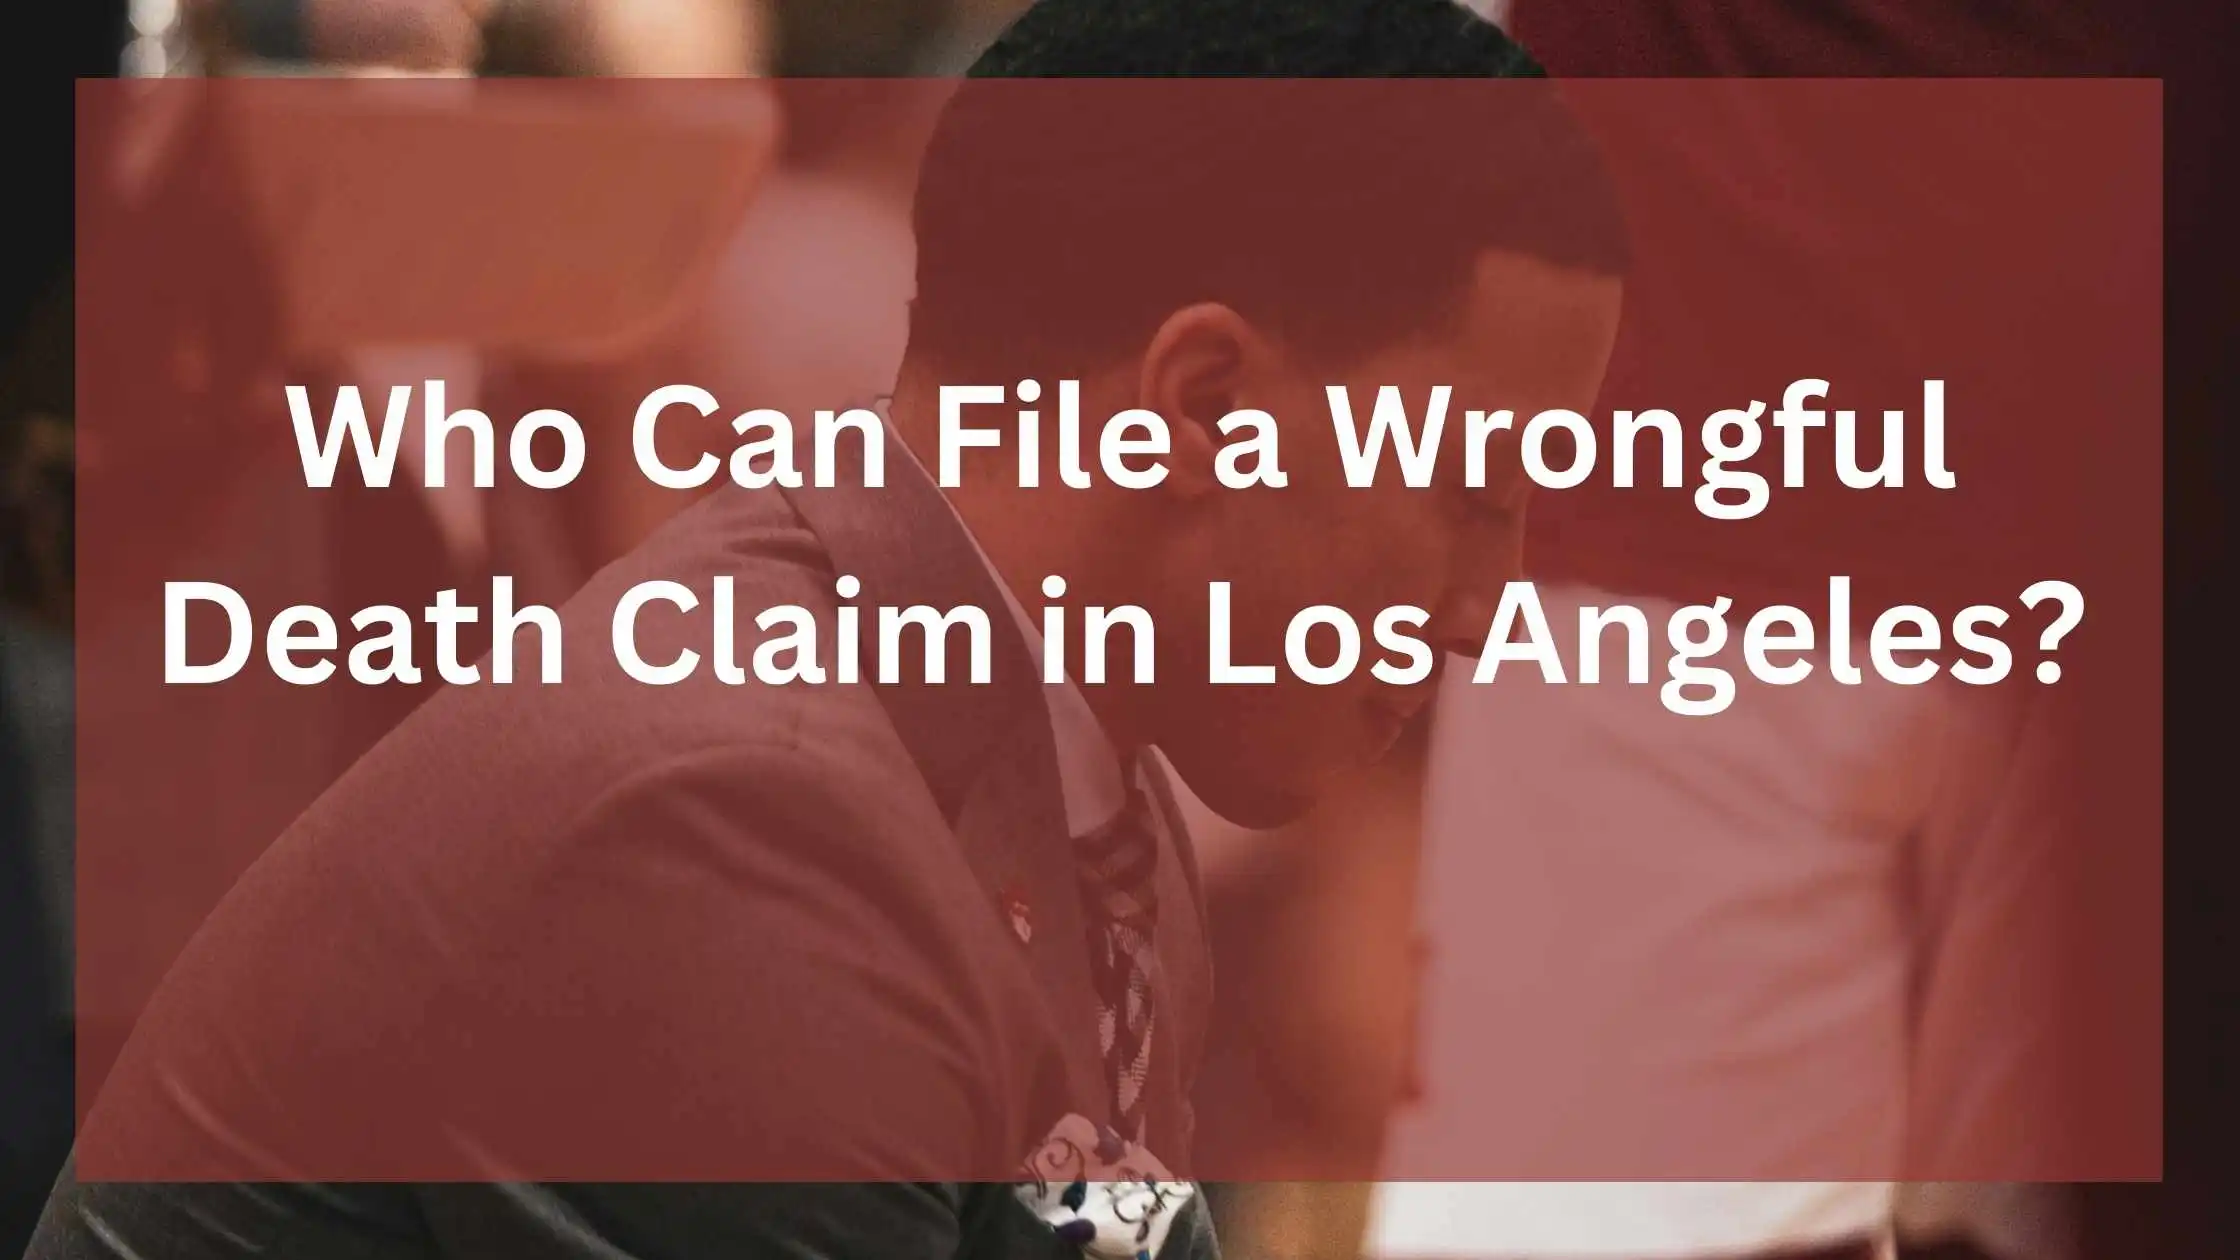 File a Wrongful Death Claim in Los Angeles